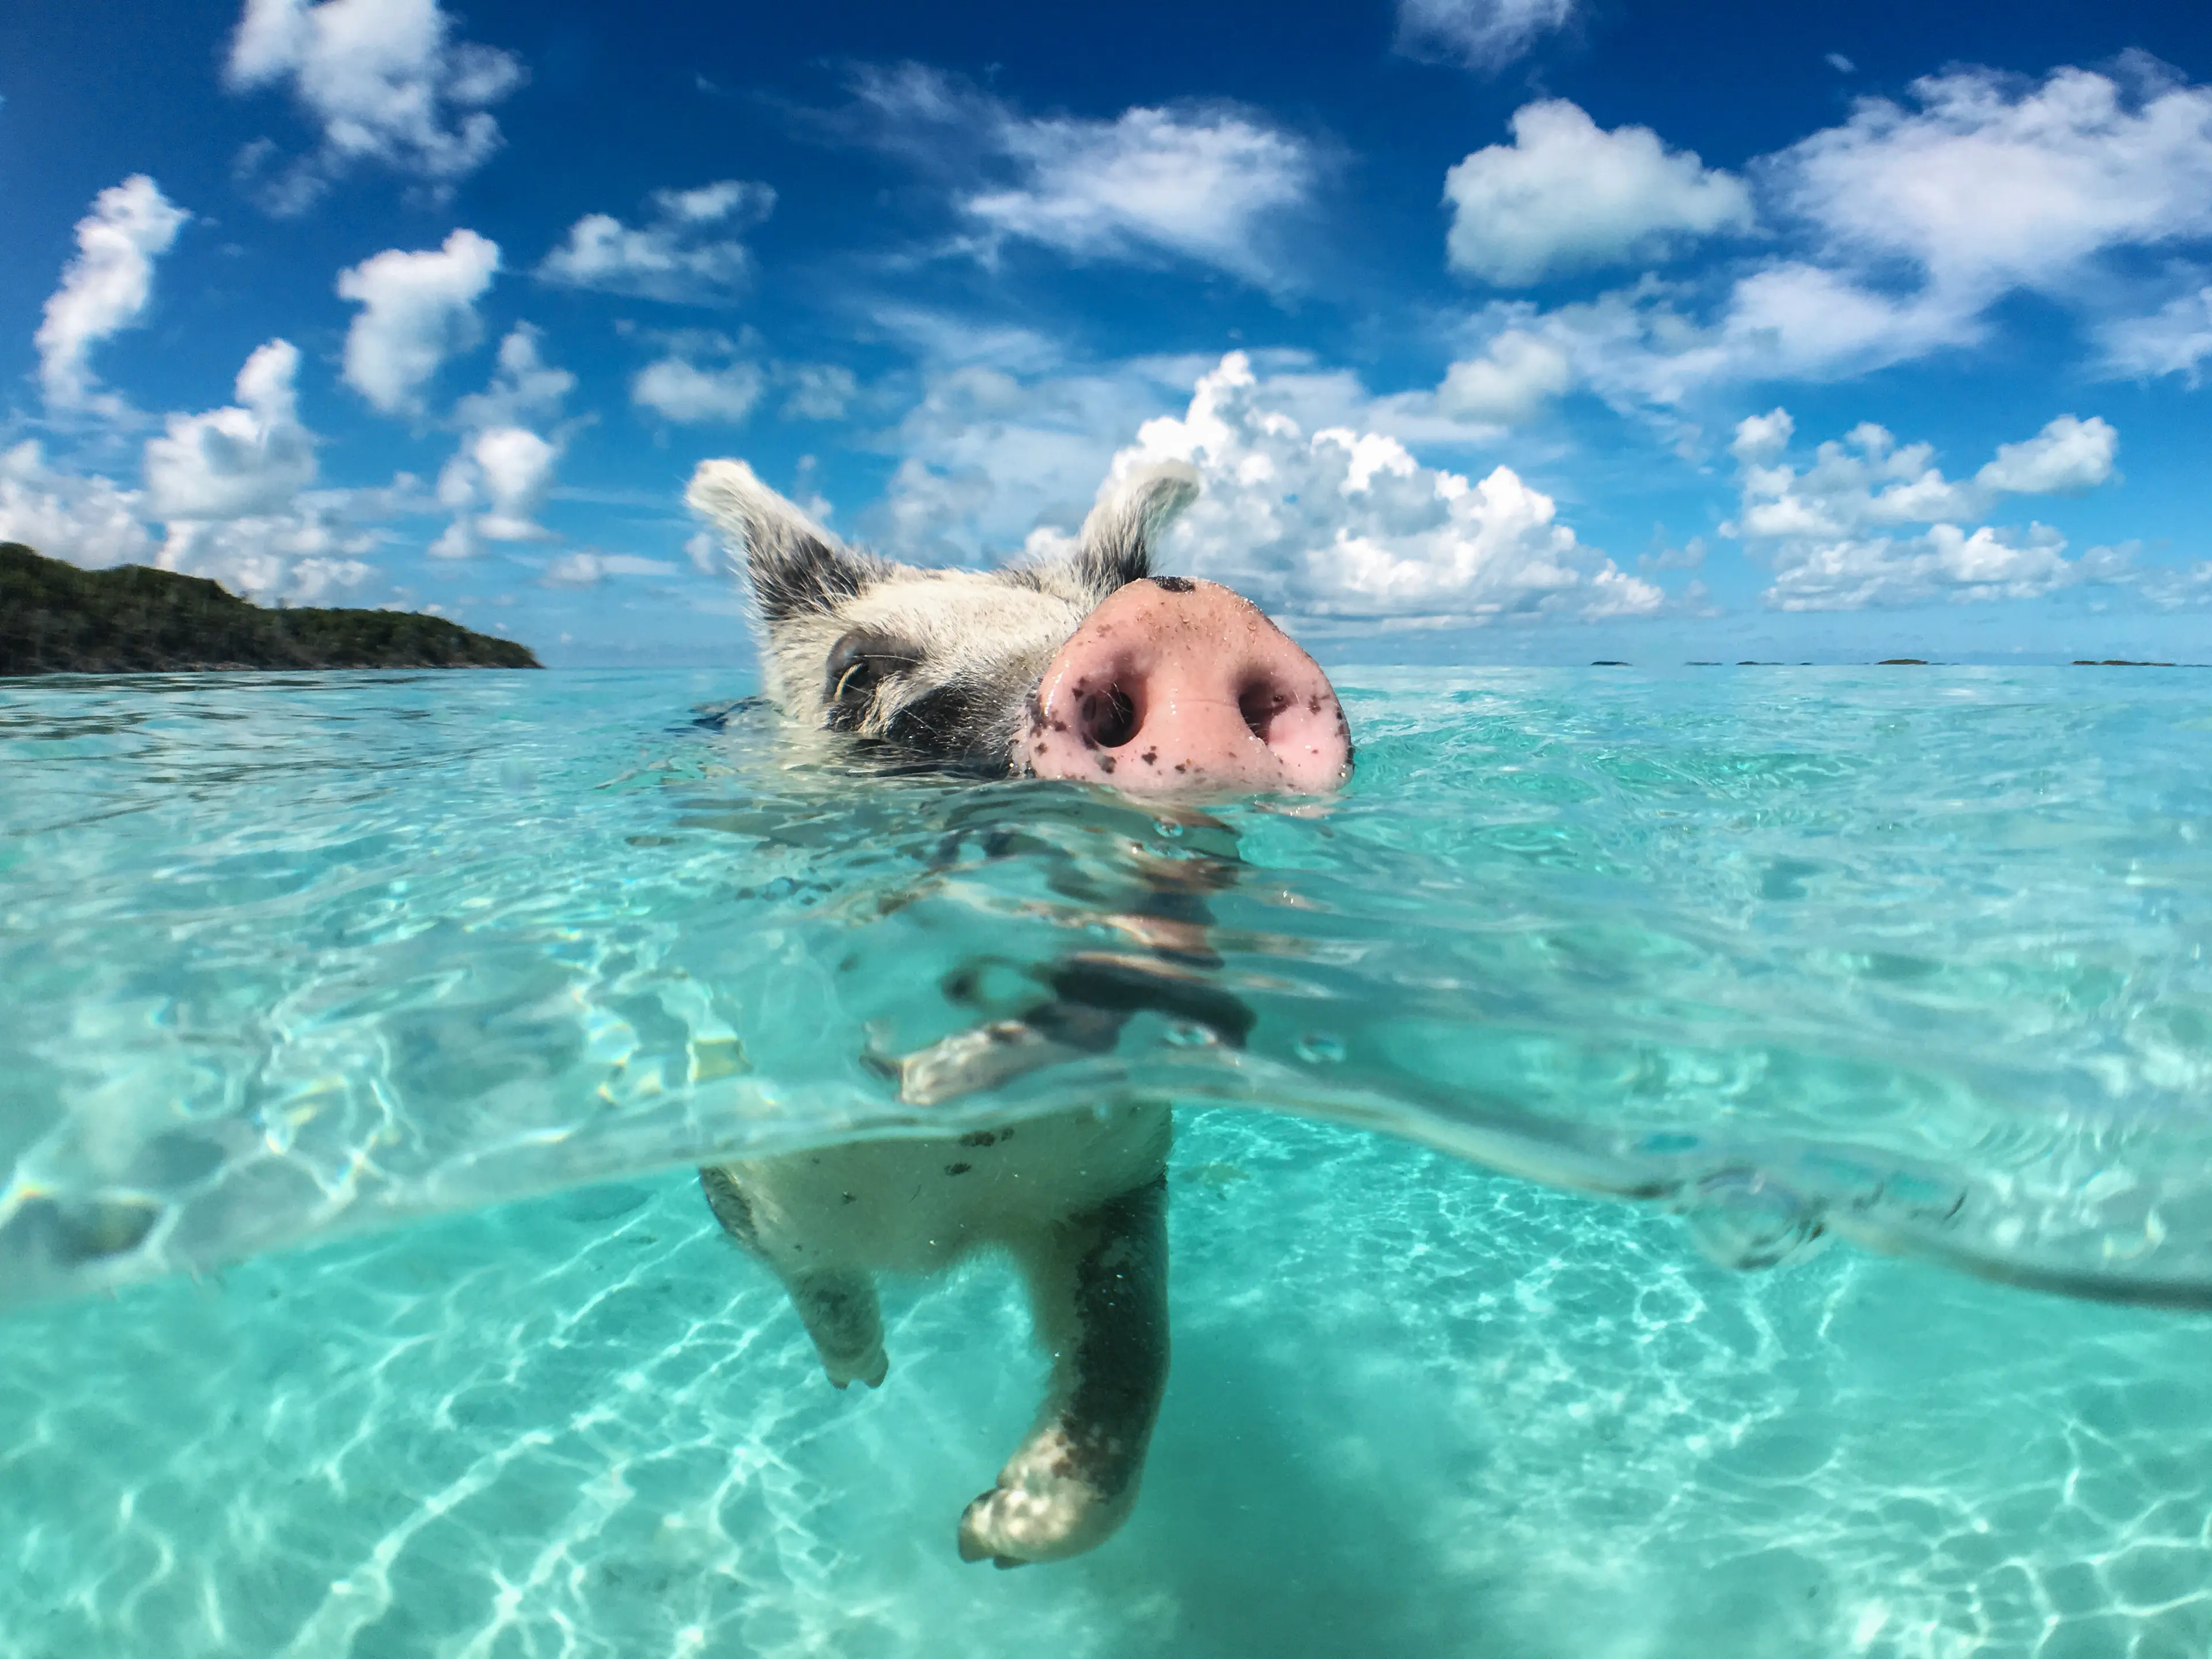 A wild pig swimming on the Big Majors Cay island